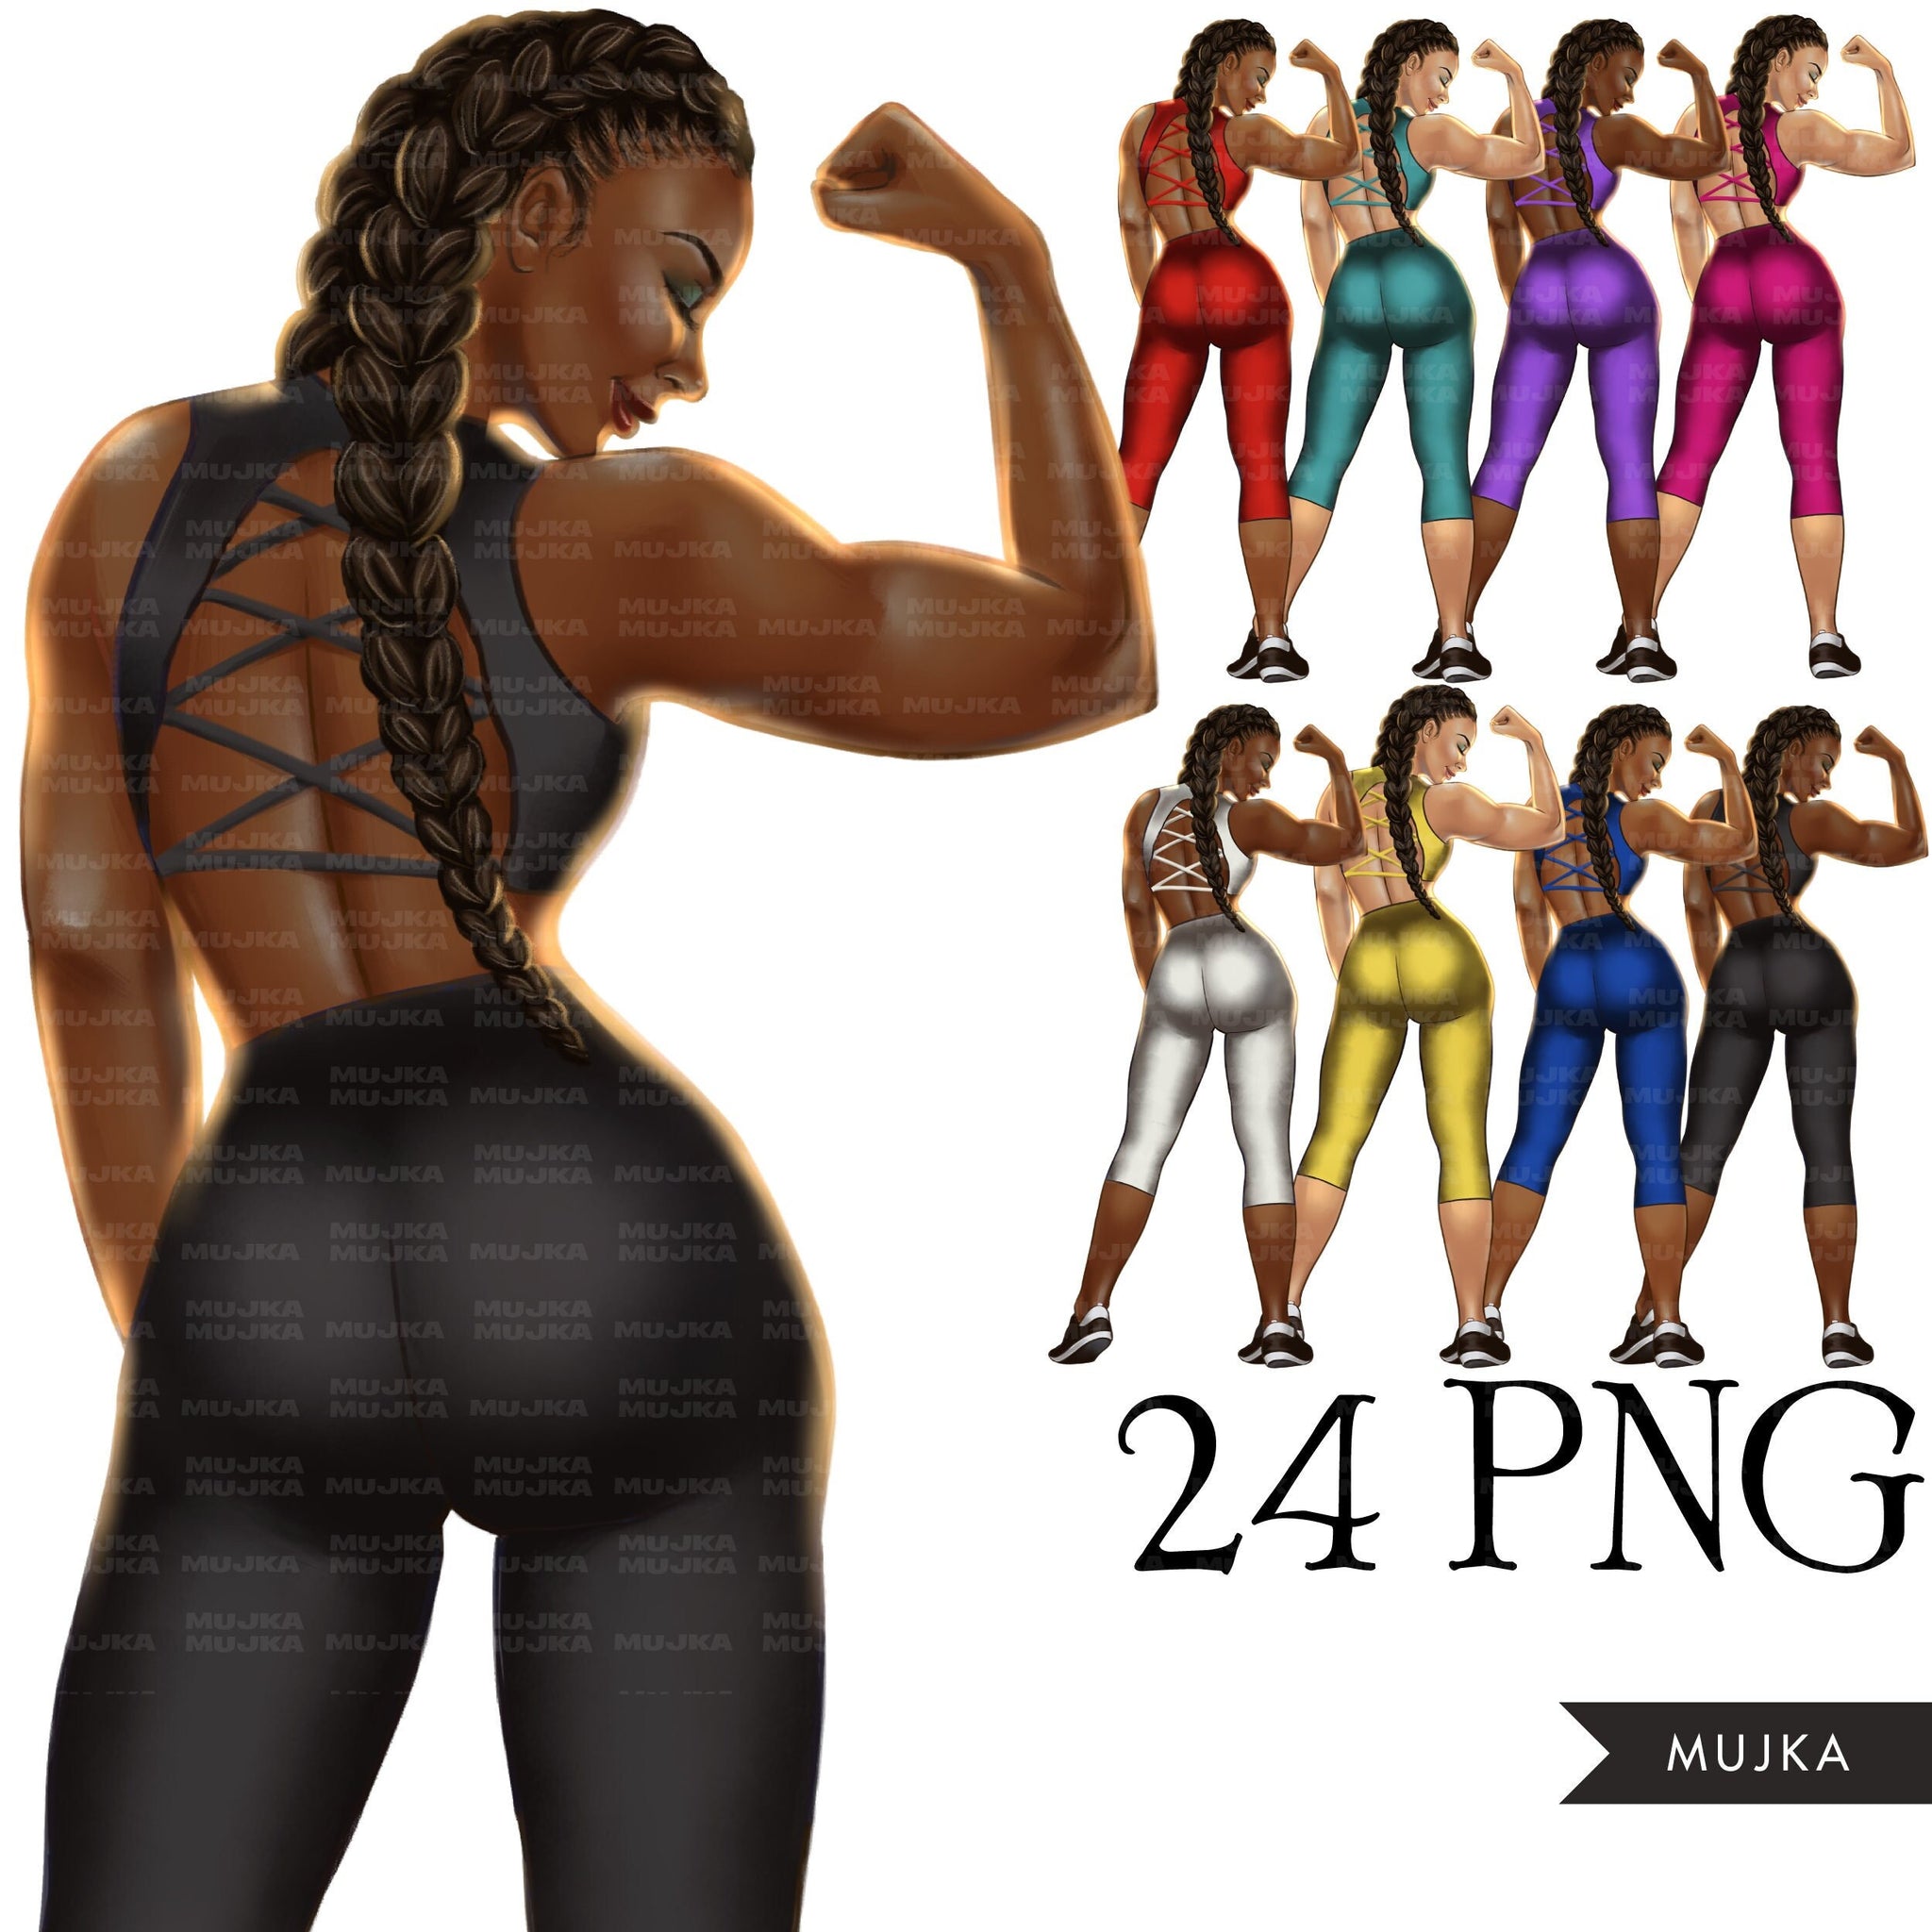 Planner girl png, Athletic woman png, personal trainer clipart, Black Girl Planner Stickers, Black Women, latino woman clipart, digital doll